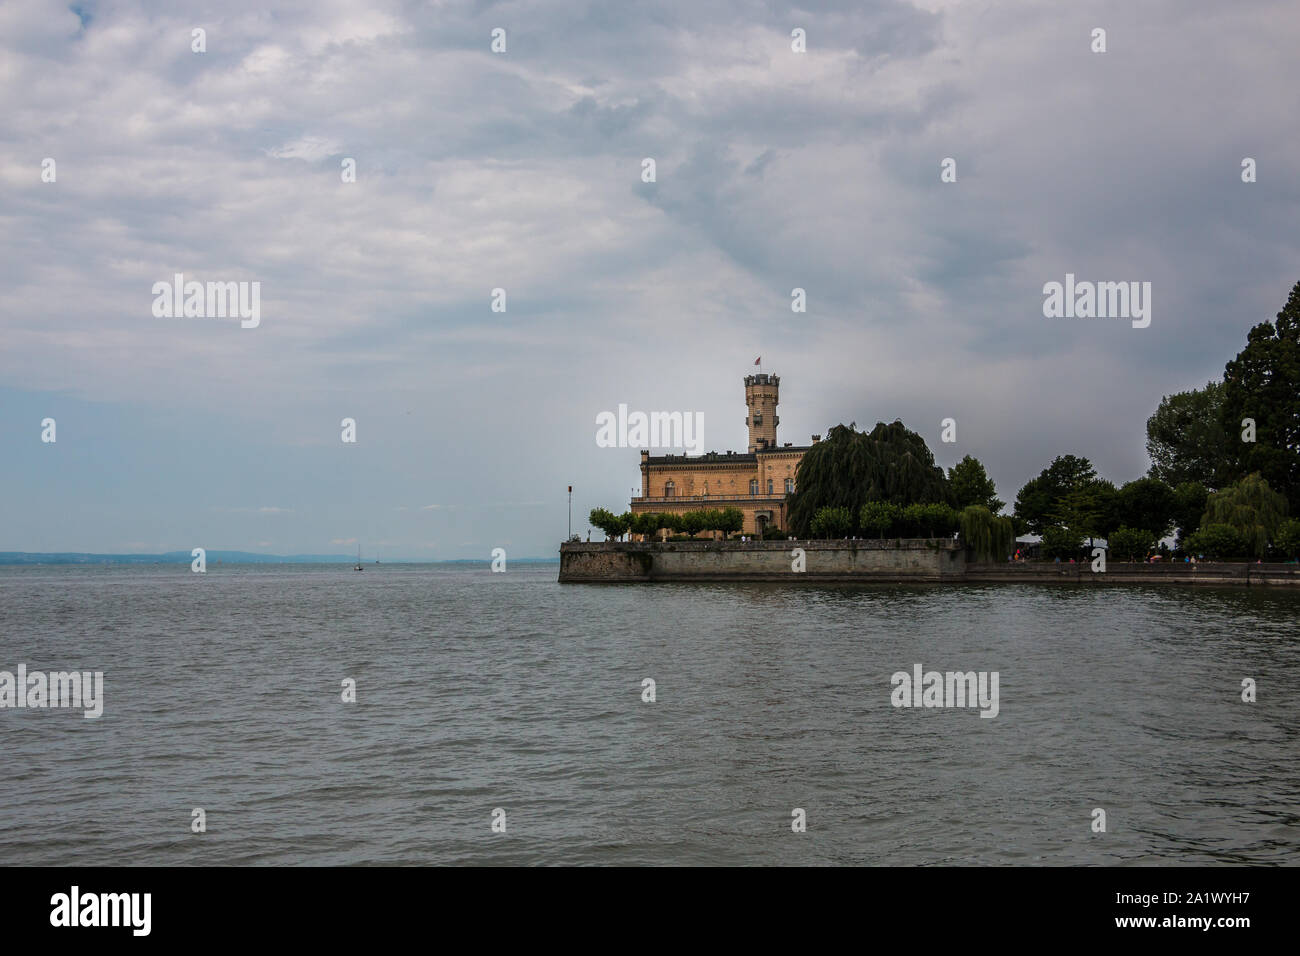 Little castle with round tower near the lake Stock Photo